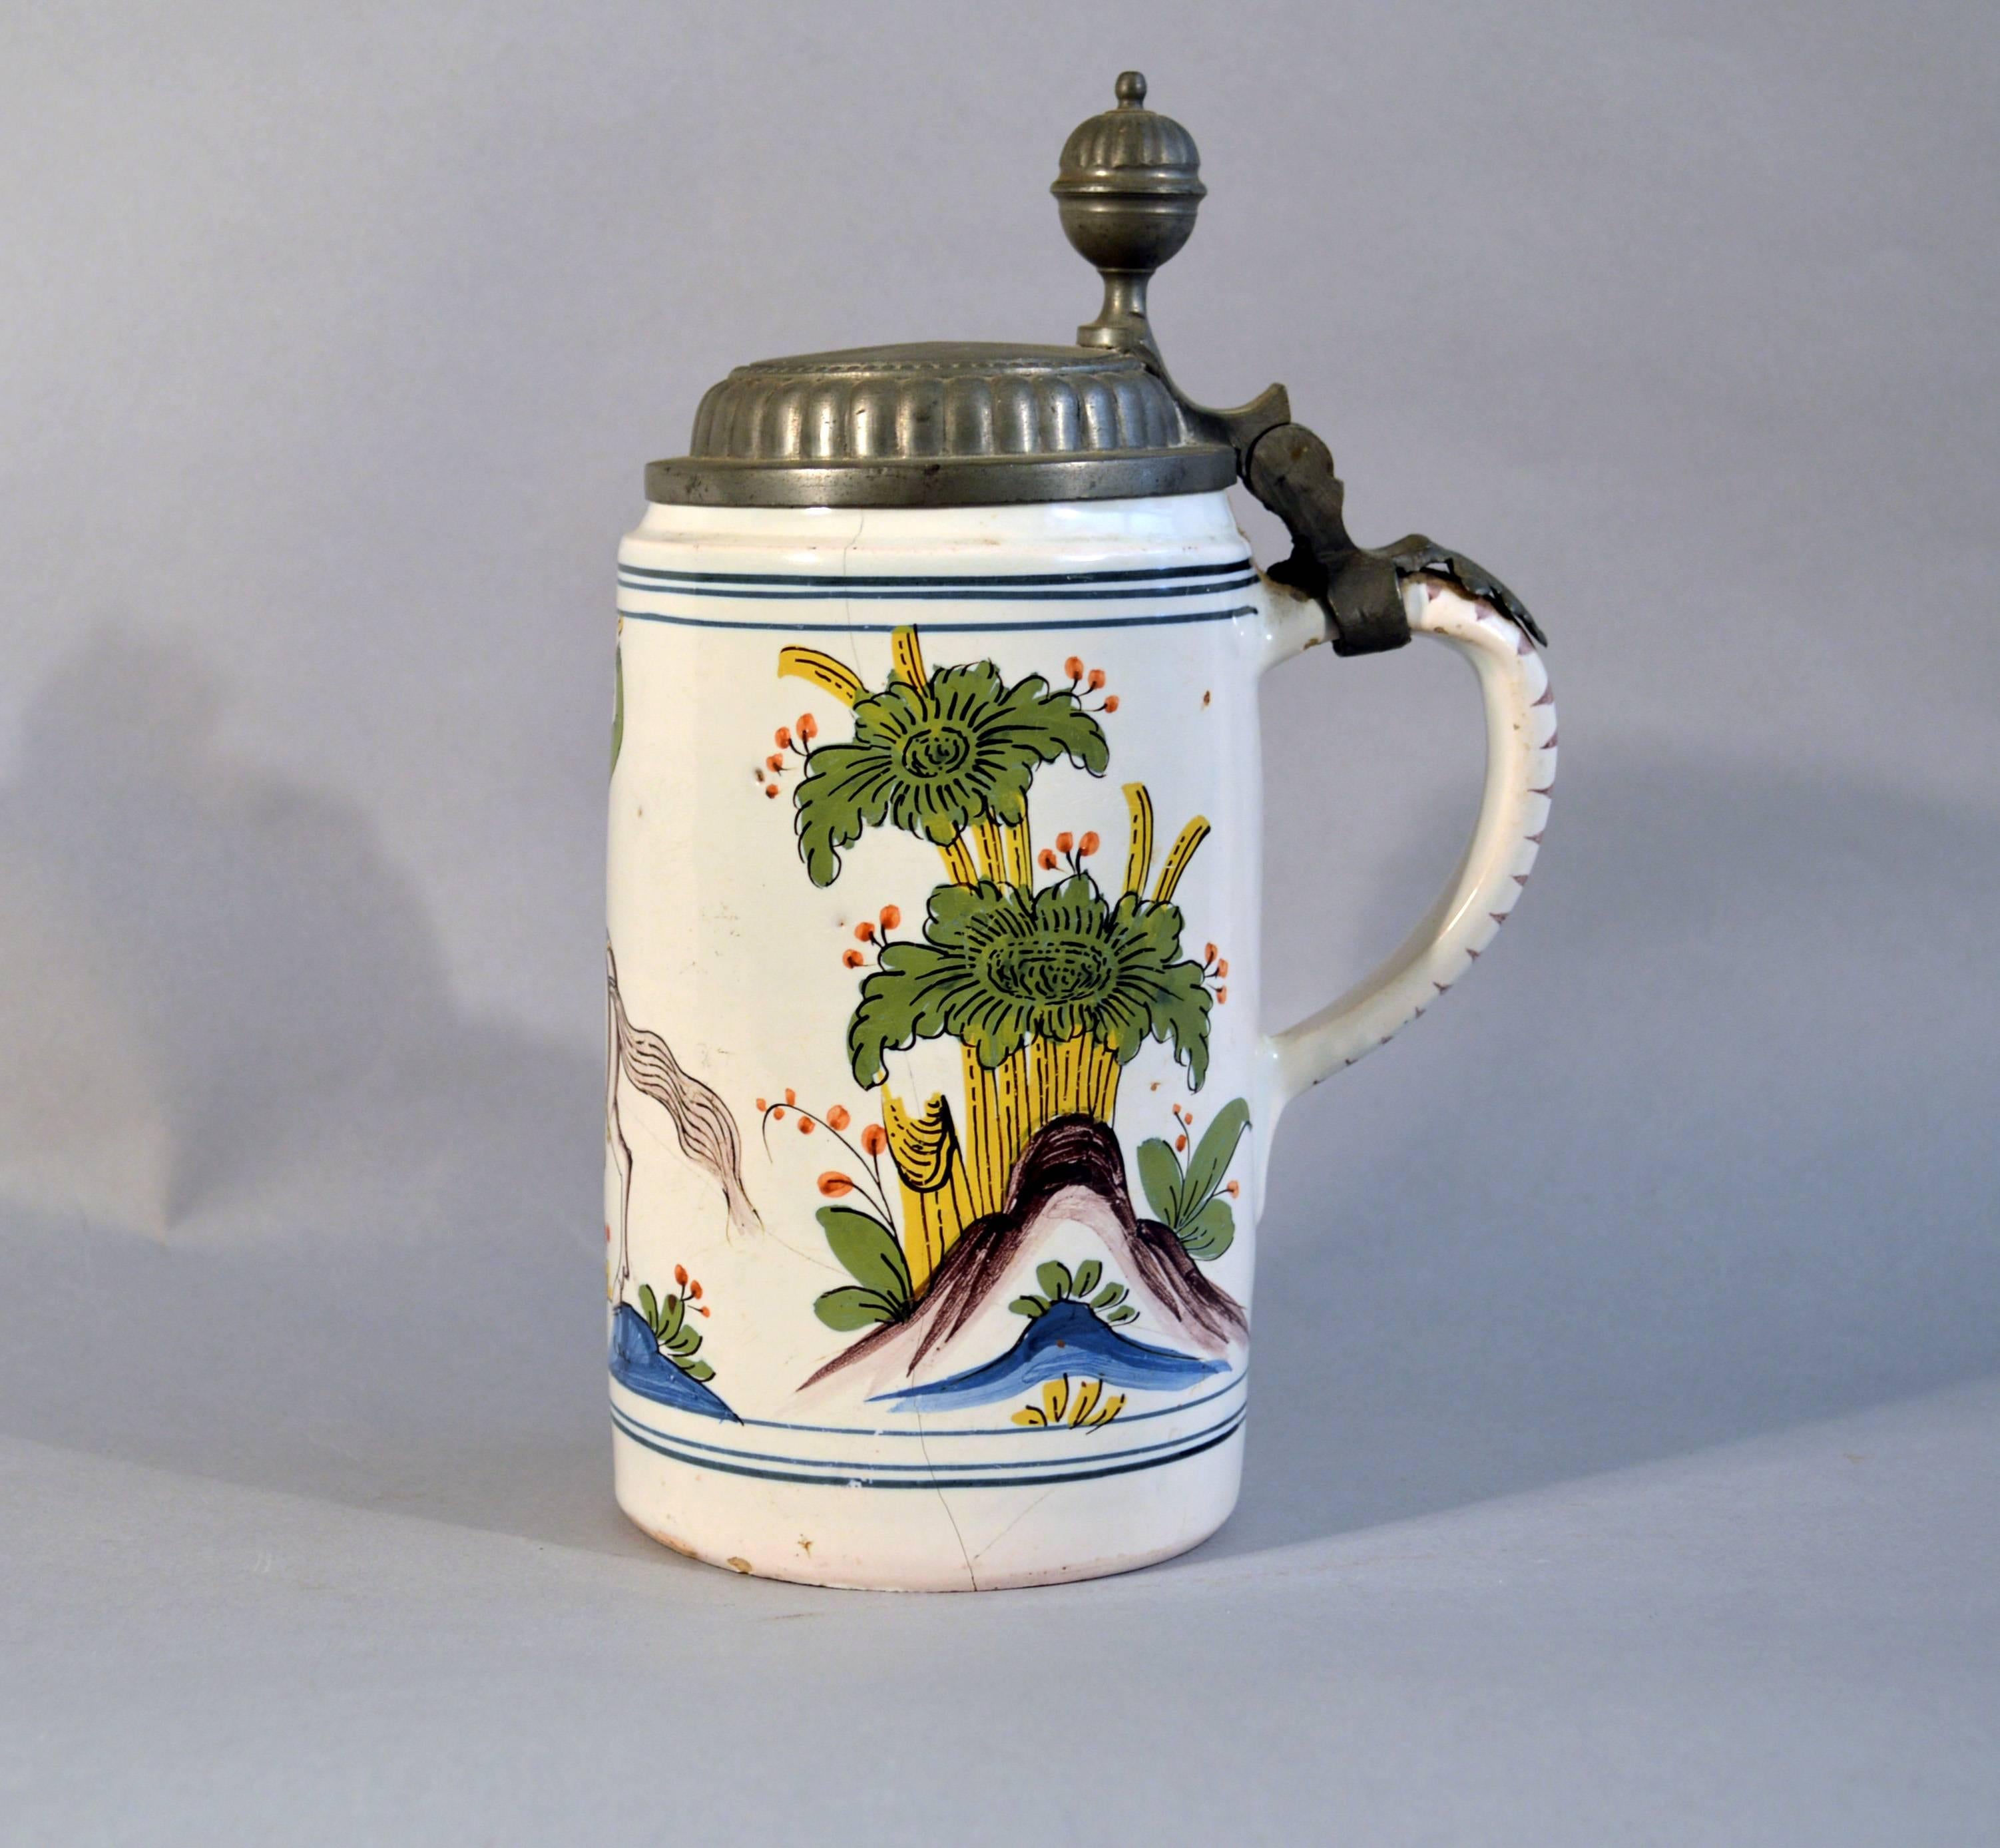 German Faience Pewter-mounted Tankard, 
Probably Thuringia,
circa 1750

A tin-glazed earthenware tankard with polychrome decoration and pewter cover. The tankard depicts a Turkish horseman with a saber held high over his head with trees and